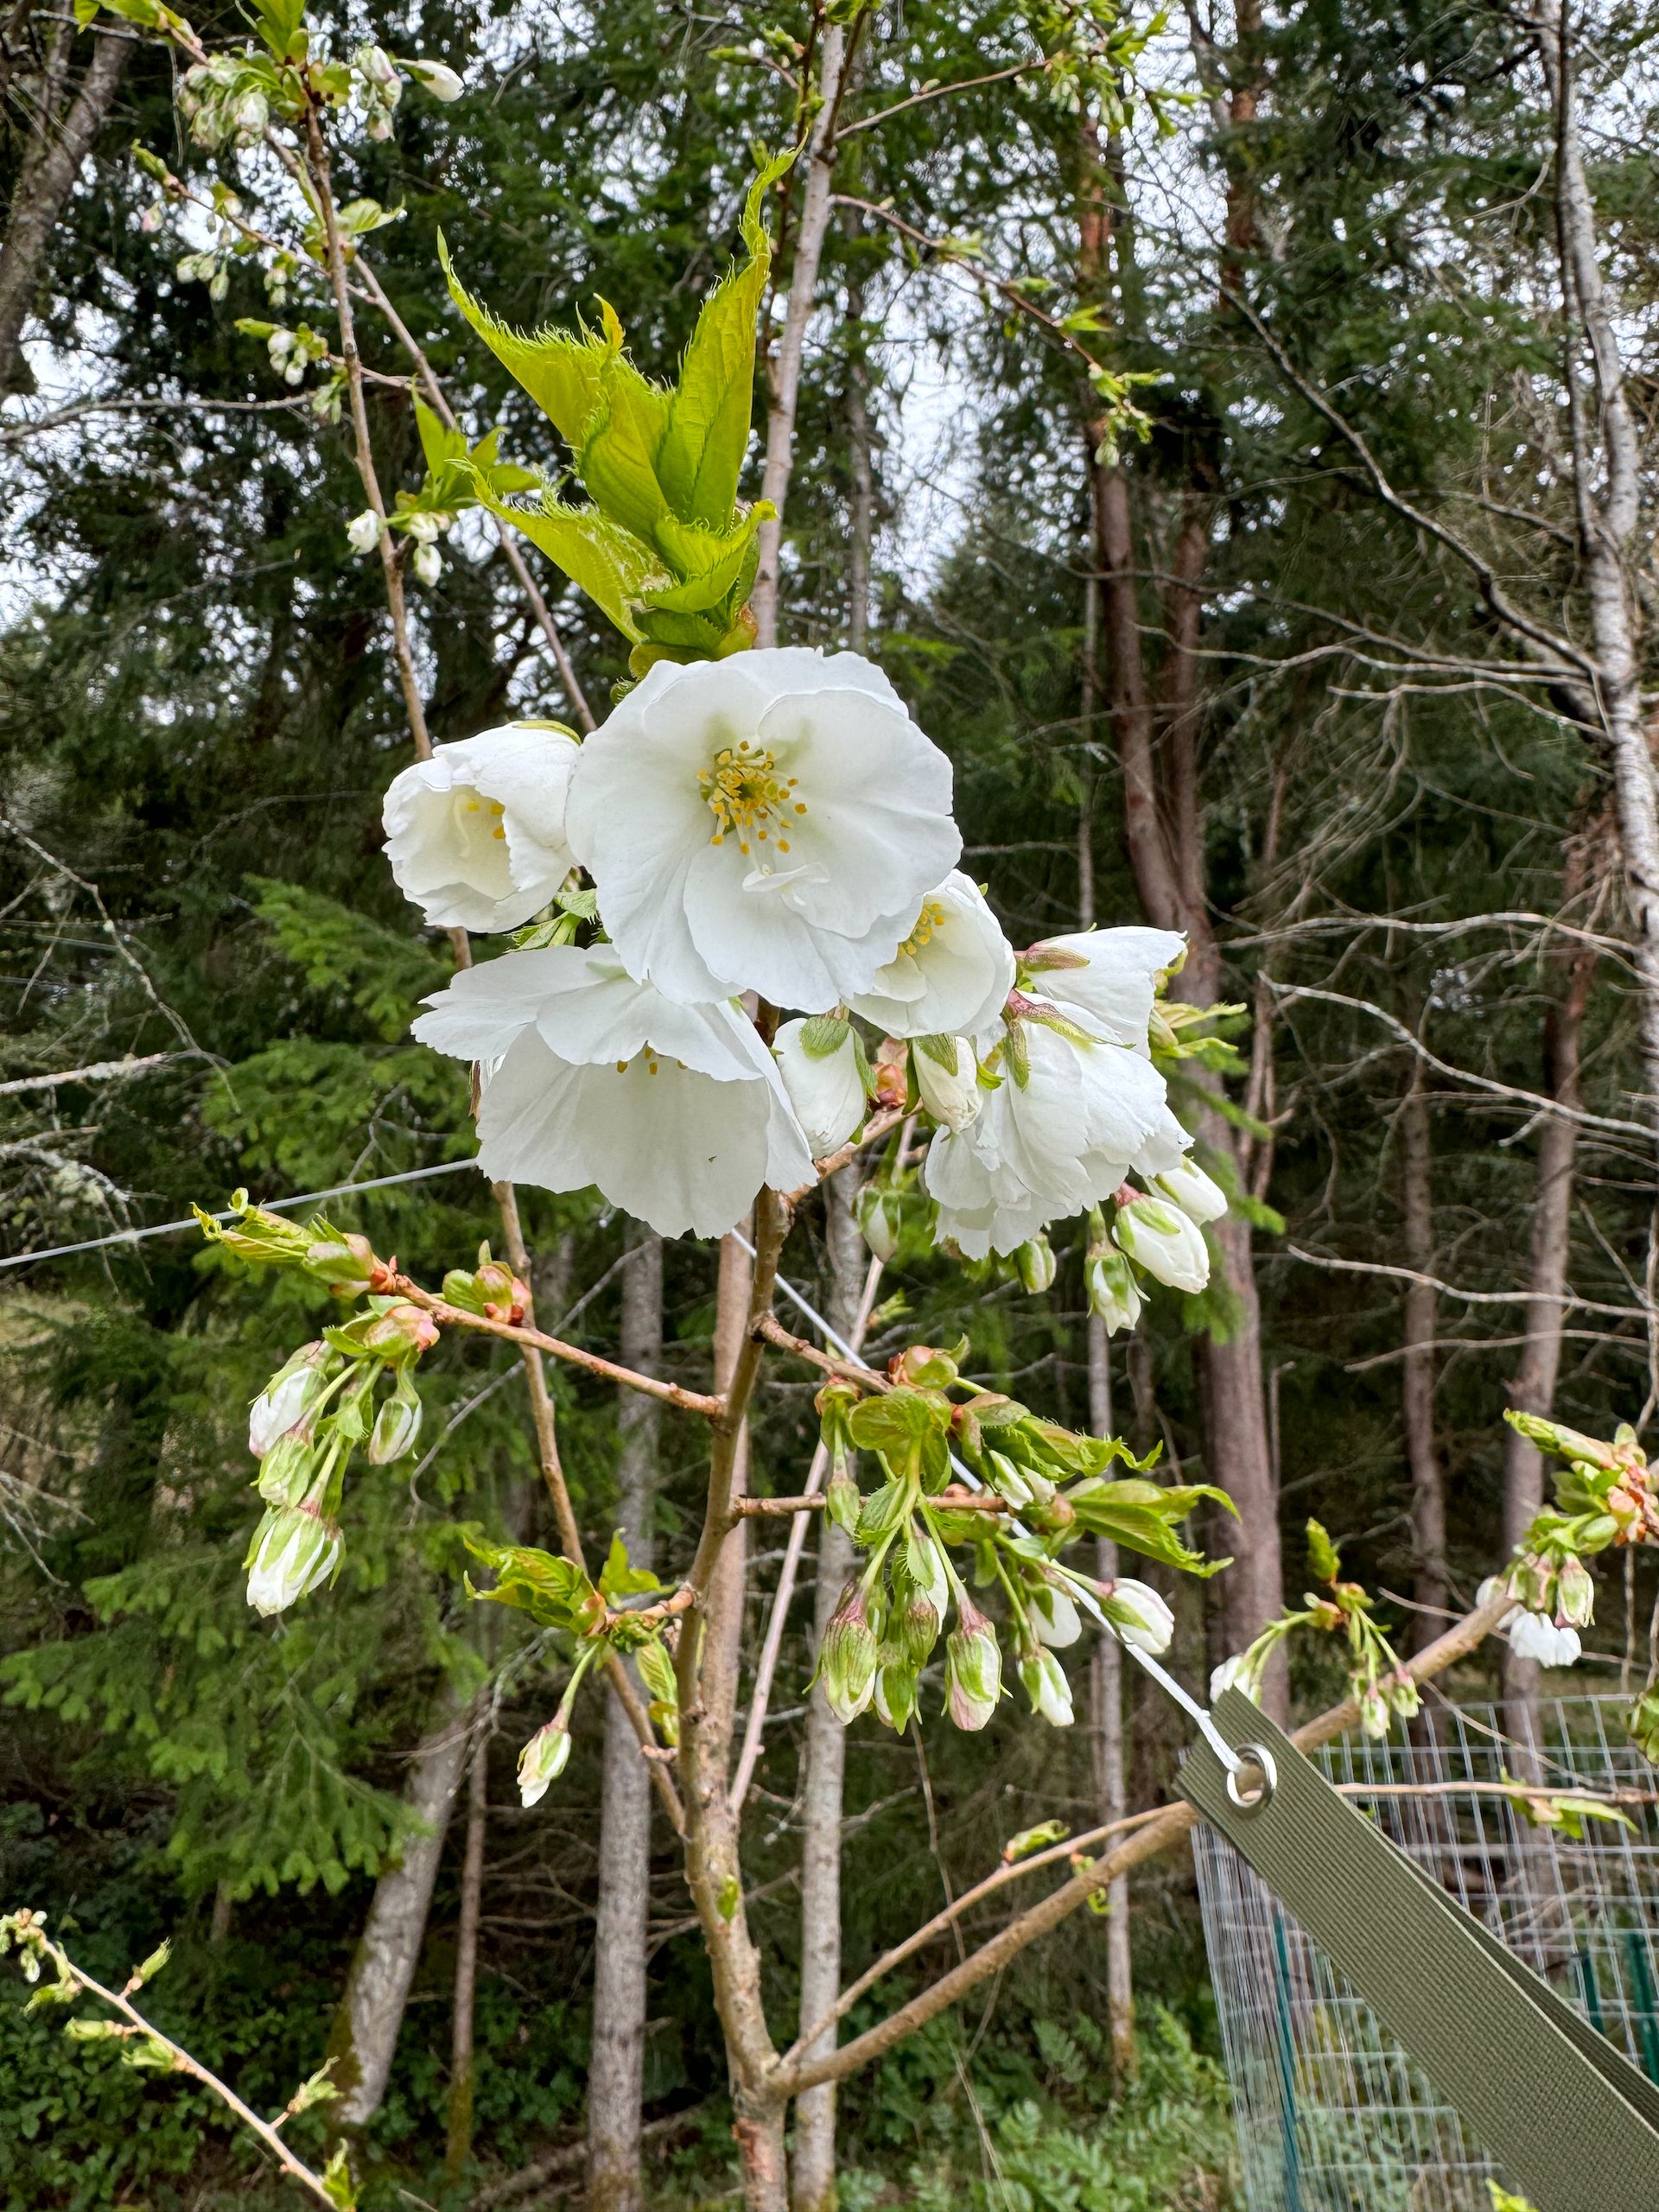  This is our new flowering cherry on Galiano - I think we’re going to miss it flowering this year. 